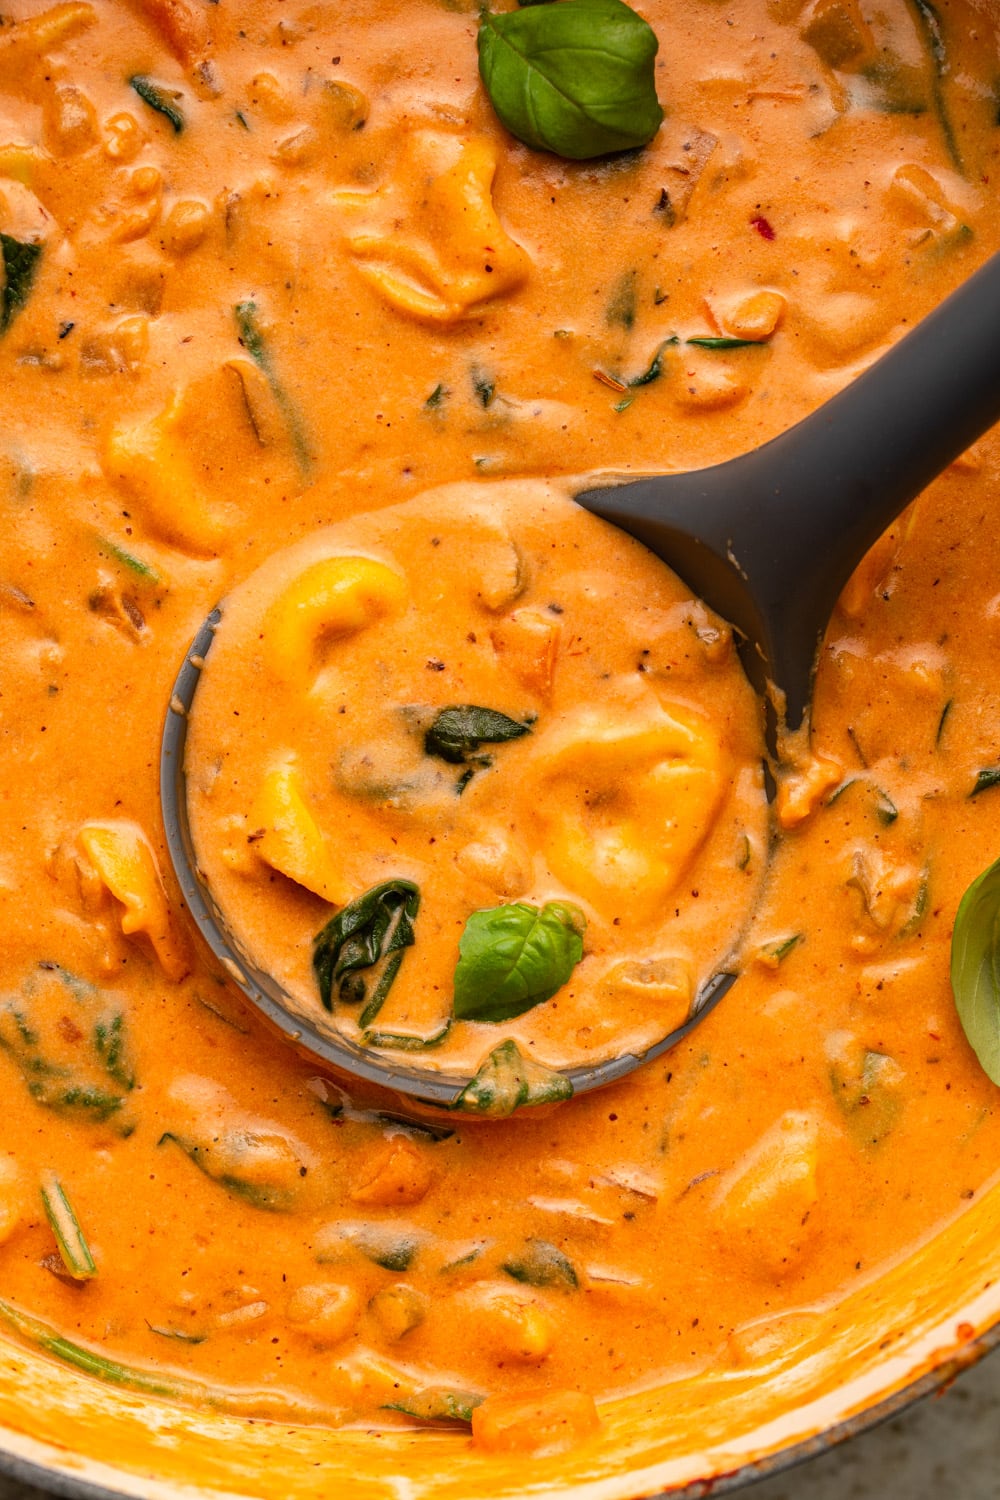 a zoomed in image of the vegan tortellini soup showing its texture